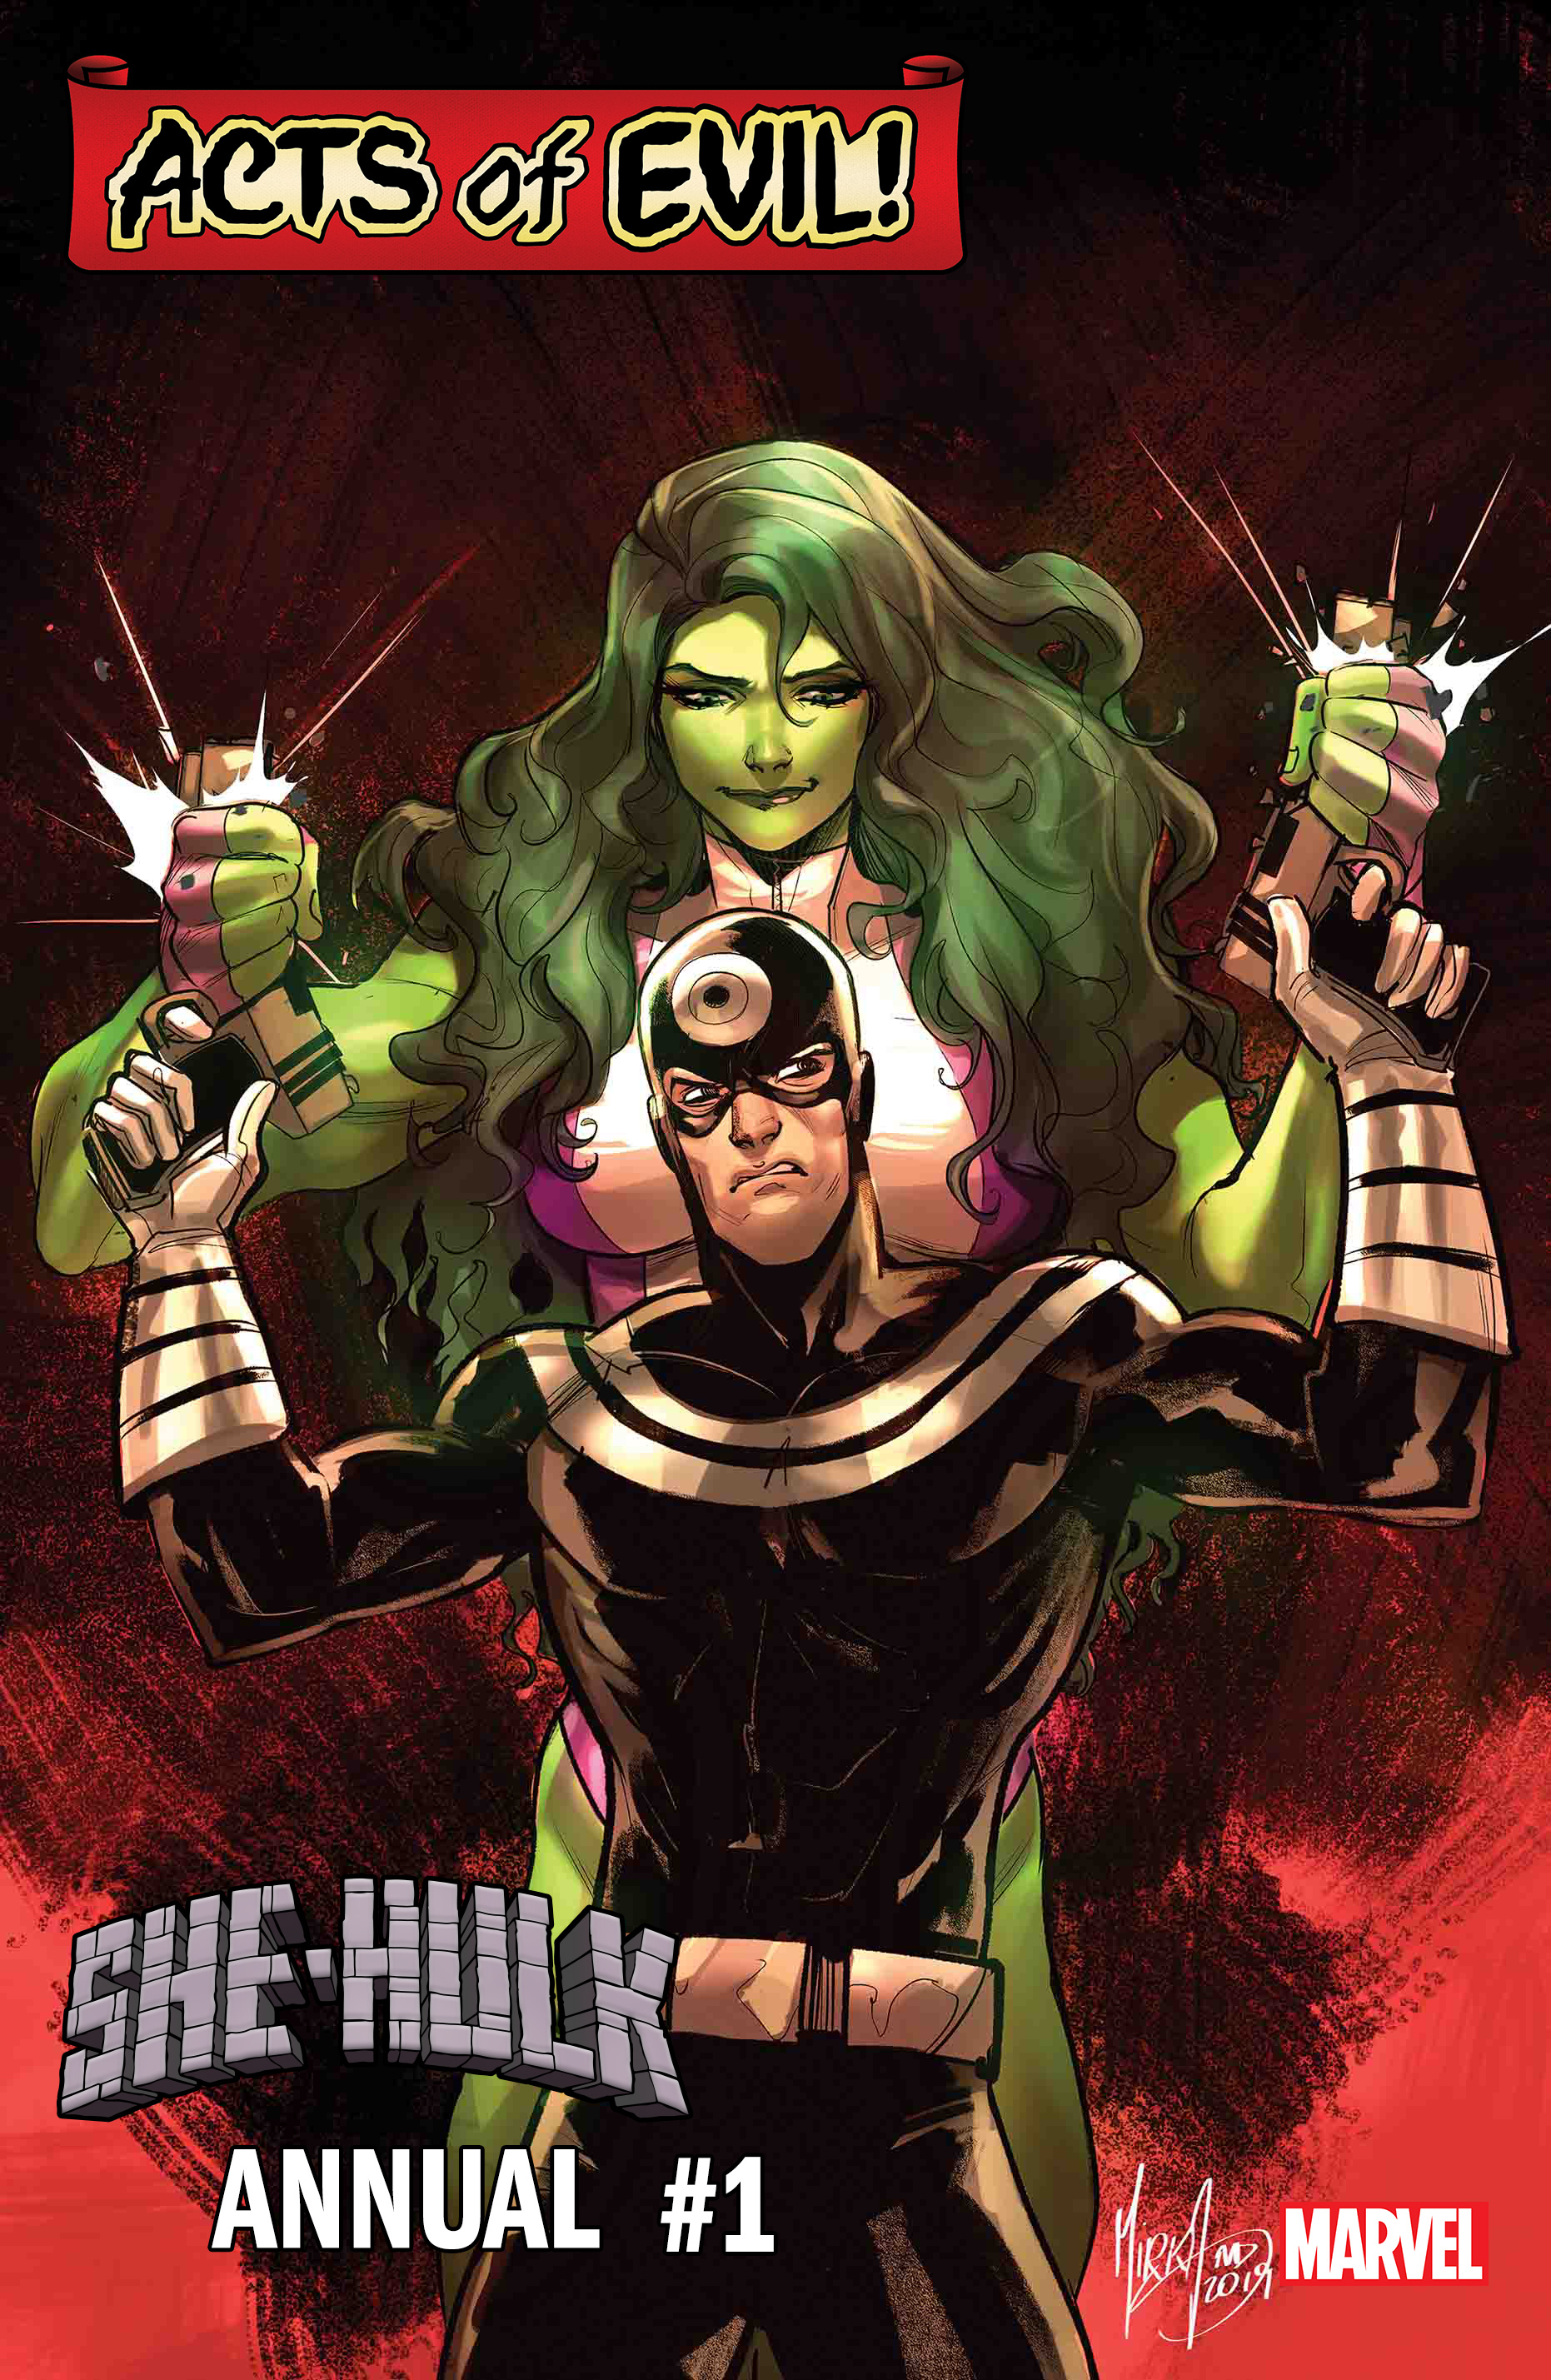 She-Hulk Annual #1 Acts of Evil